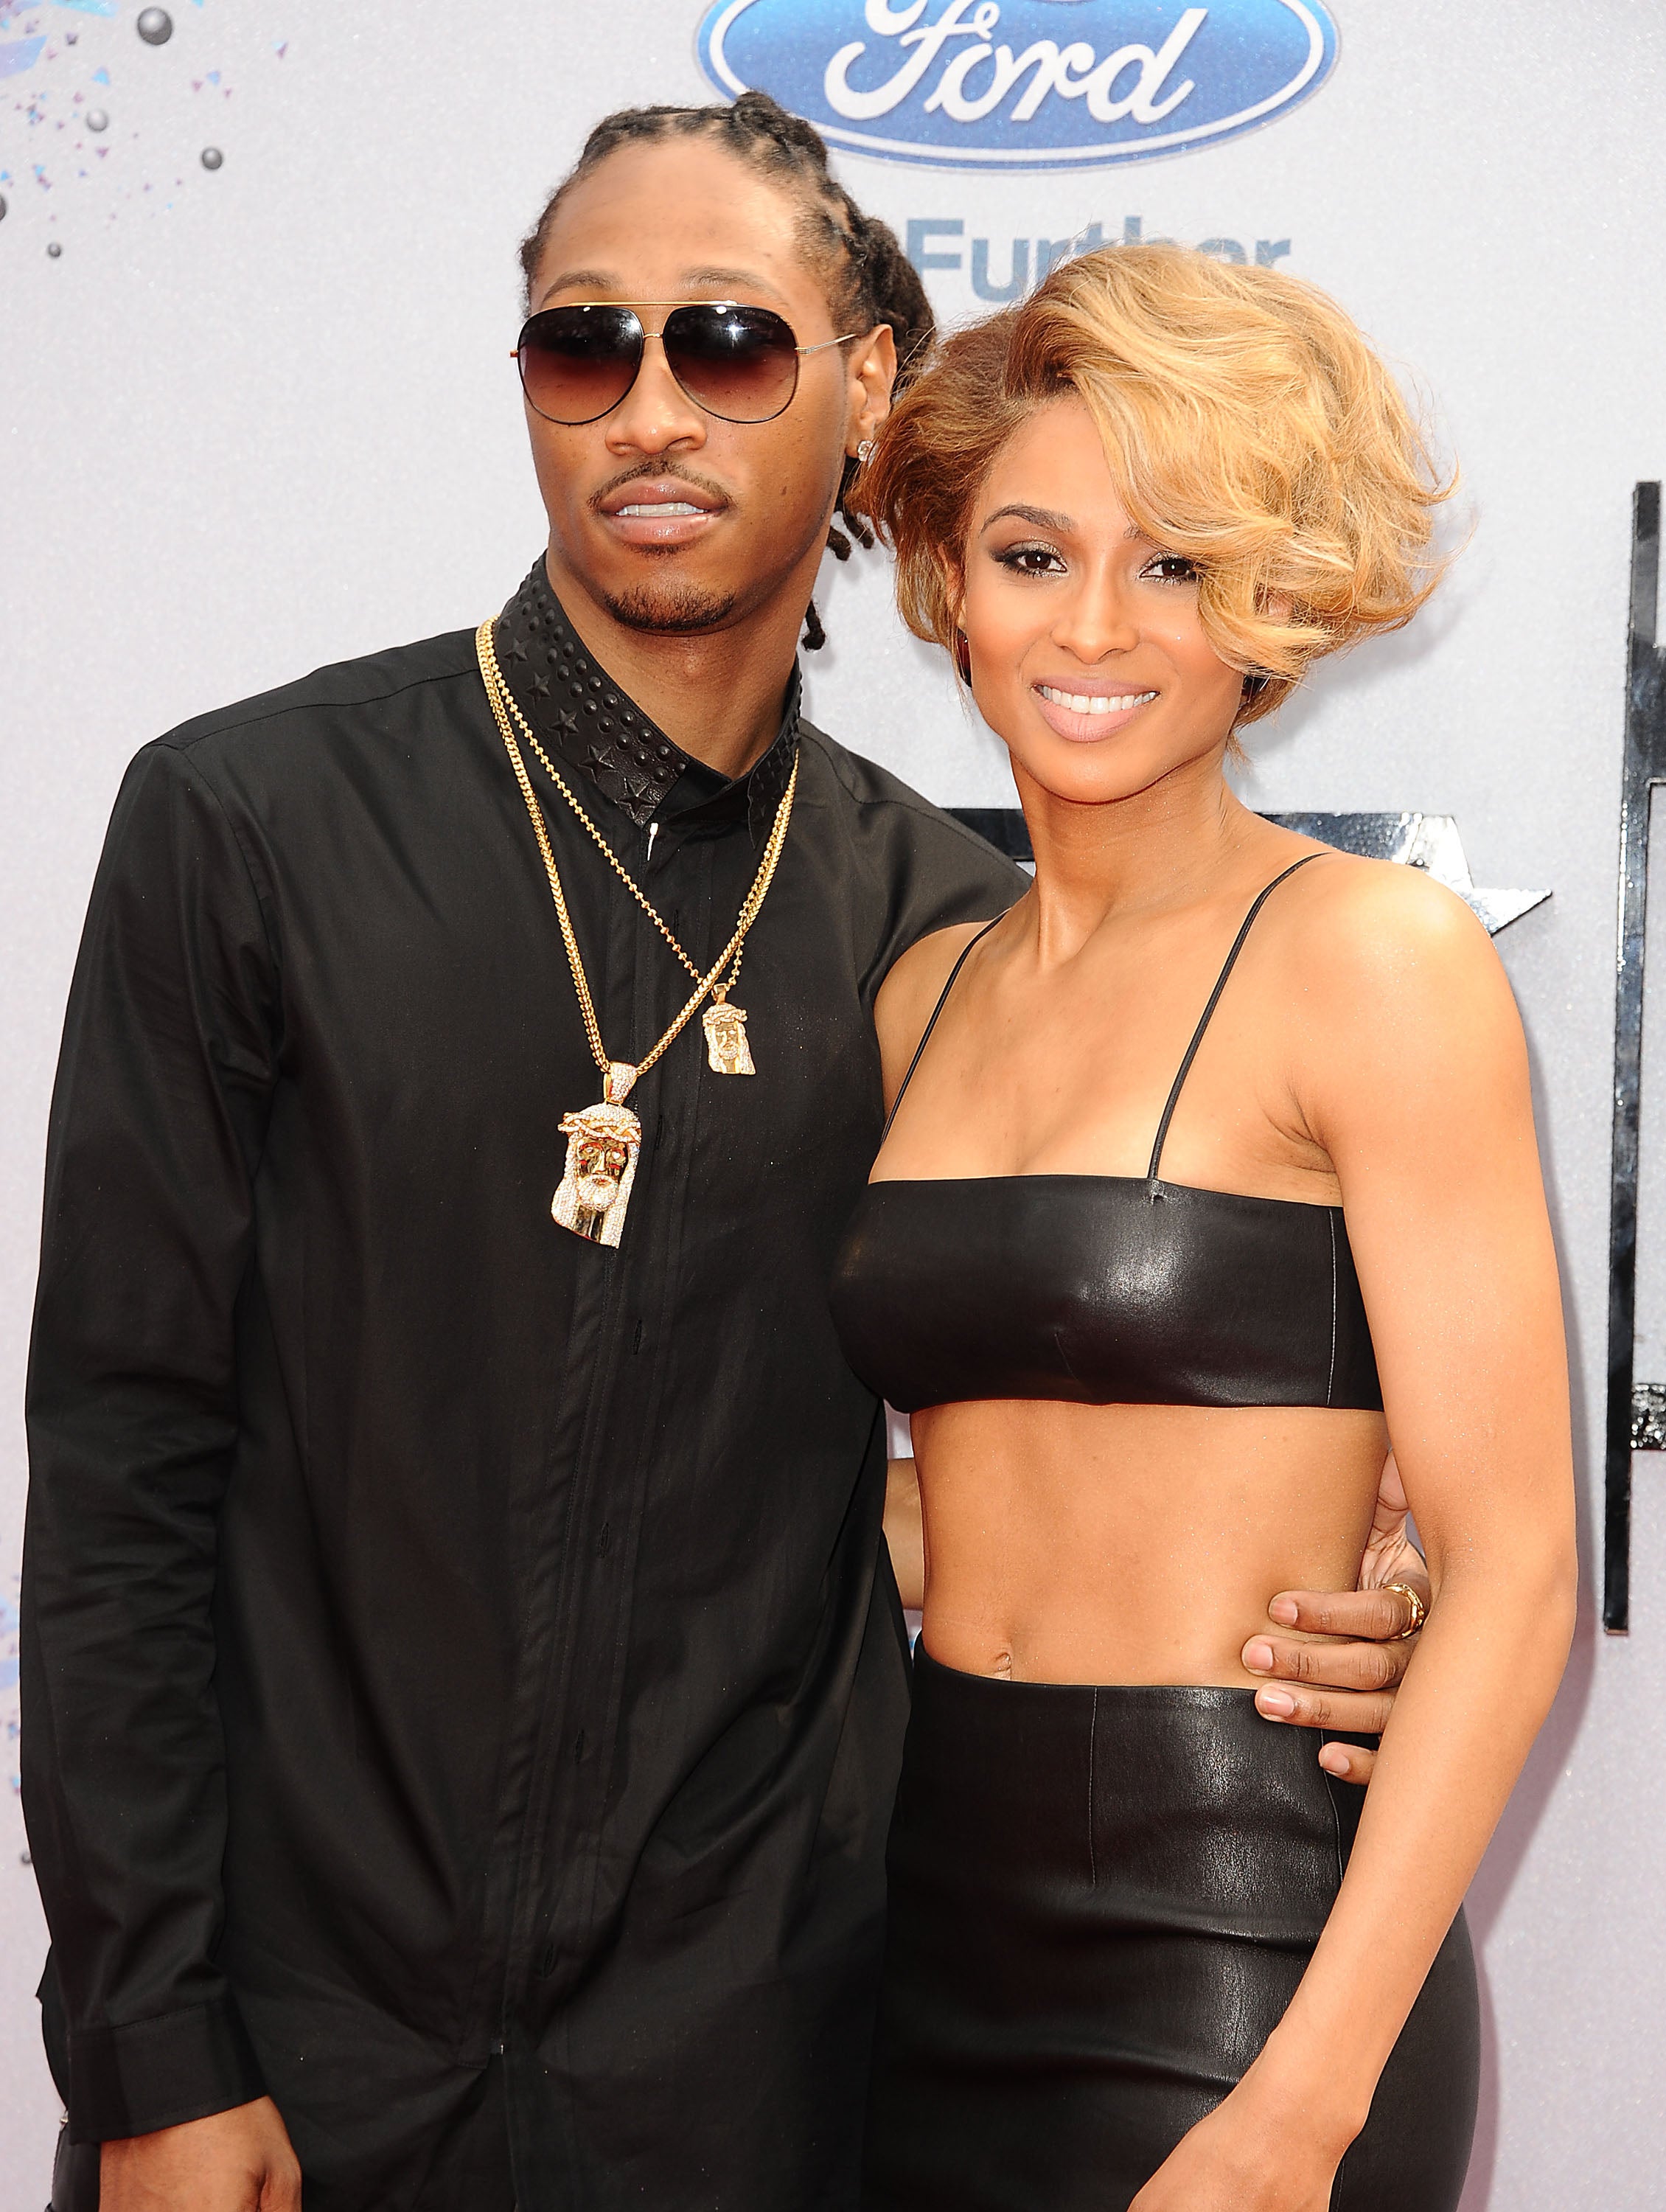 Ciara Sues Future for $15 Million: 'She Just Wants What's Best for Her and Her Baby,' Says Source